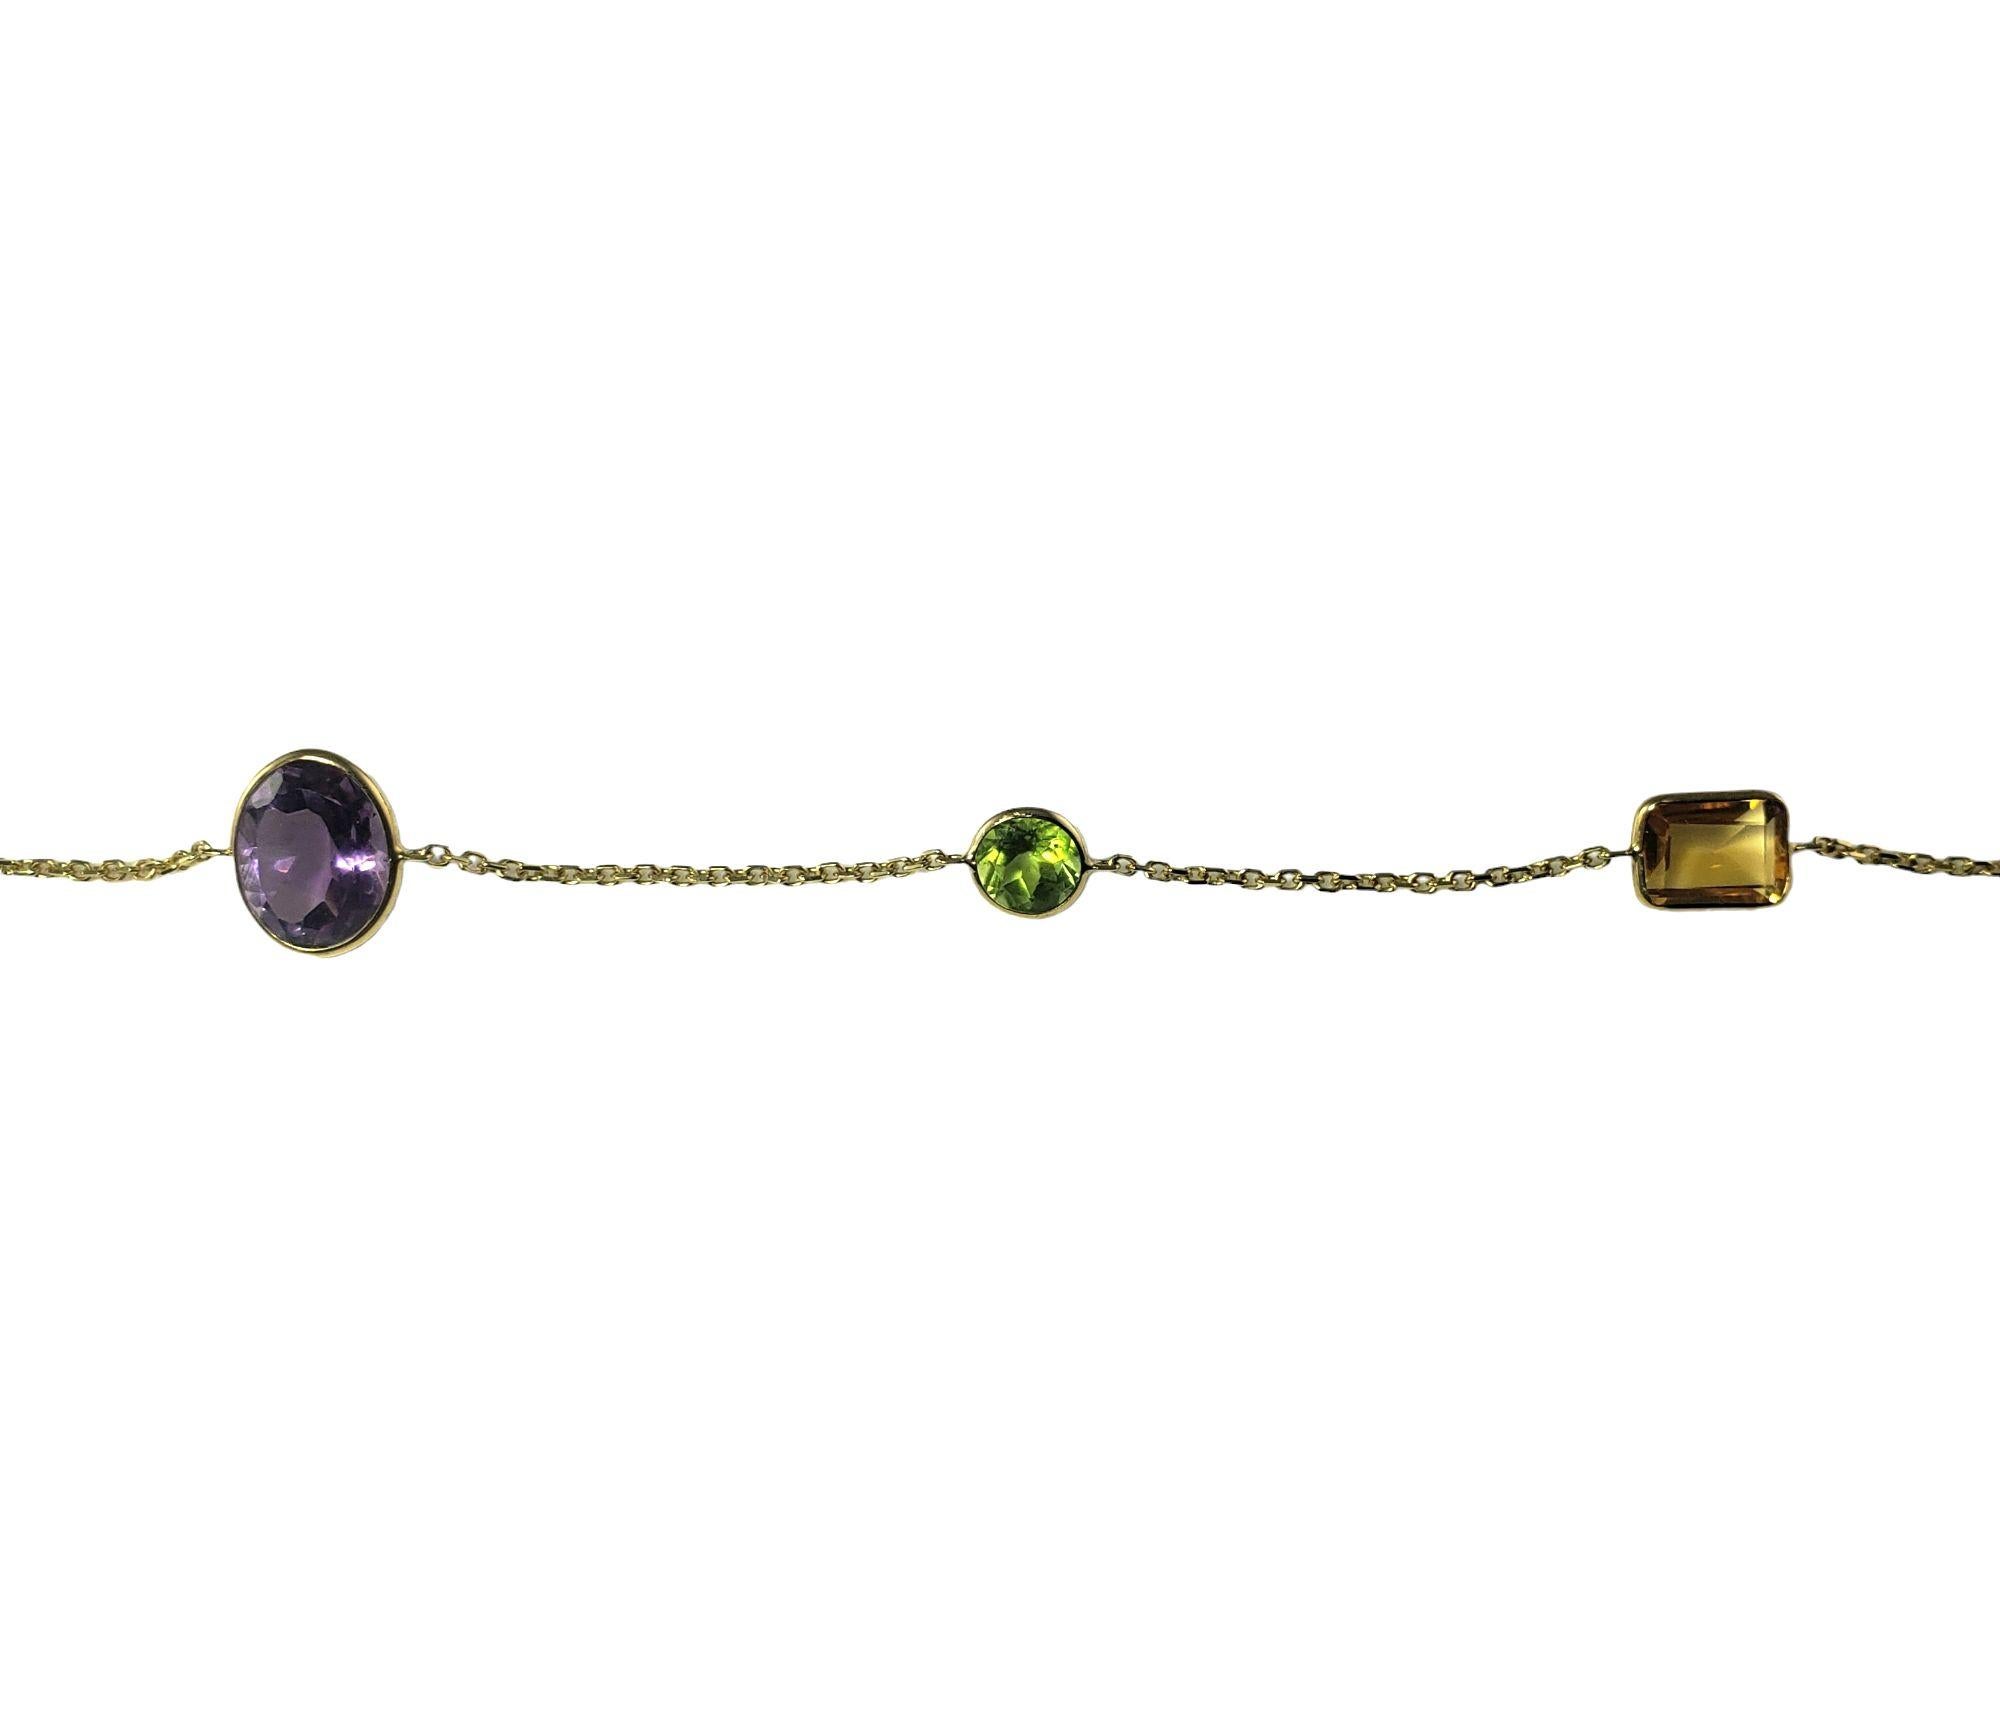 This elegant necklace features one square smoky quartz, five citrines, five blue topaz, three peridots, two garnets, three amethysts and one prasiolite set in classic 14K yellow gold.

Total gemstone weight:  43.5 ct.

Size: 30 inches

Weight:  13.4